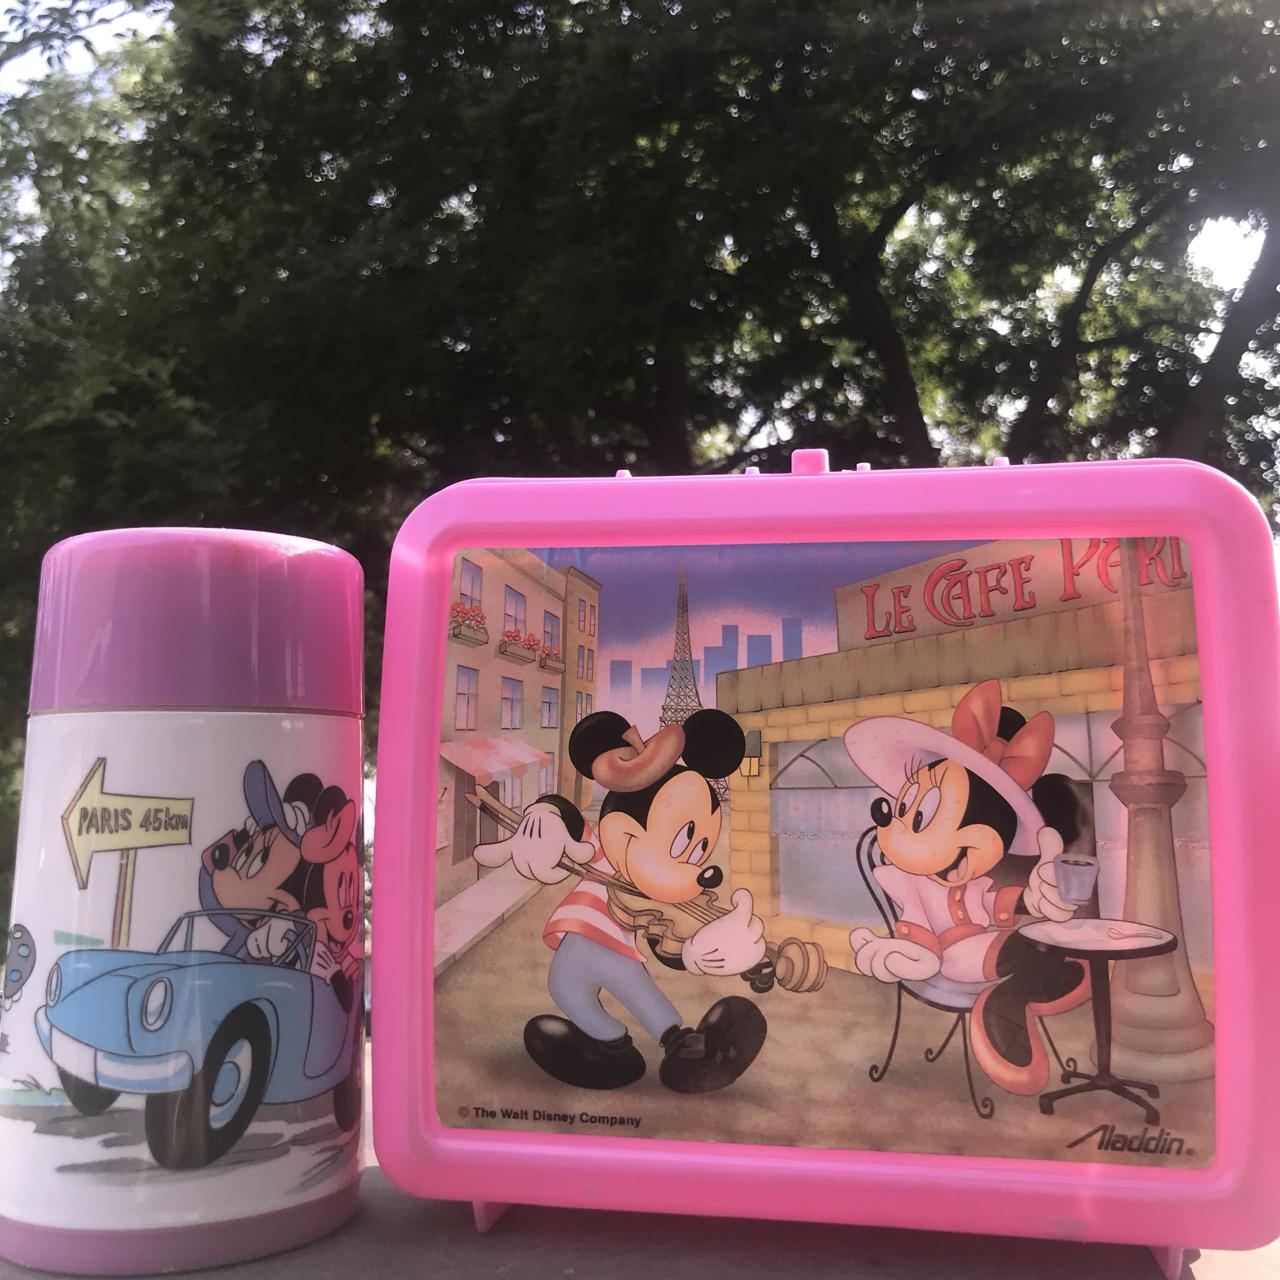 Minnie Mouse Lunch Box vintage 90's Disney Pink Plastic Lunch Box